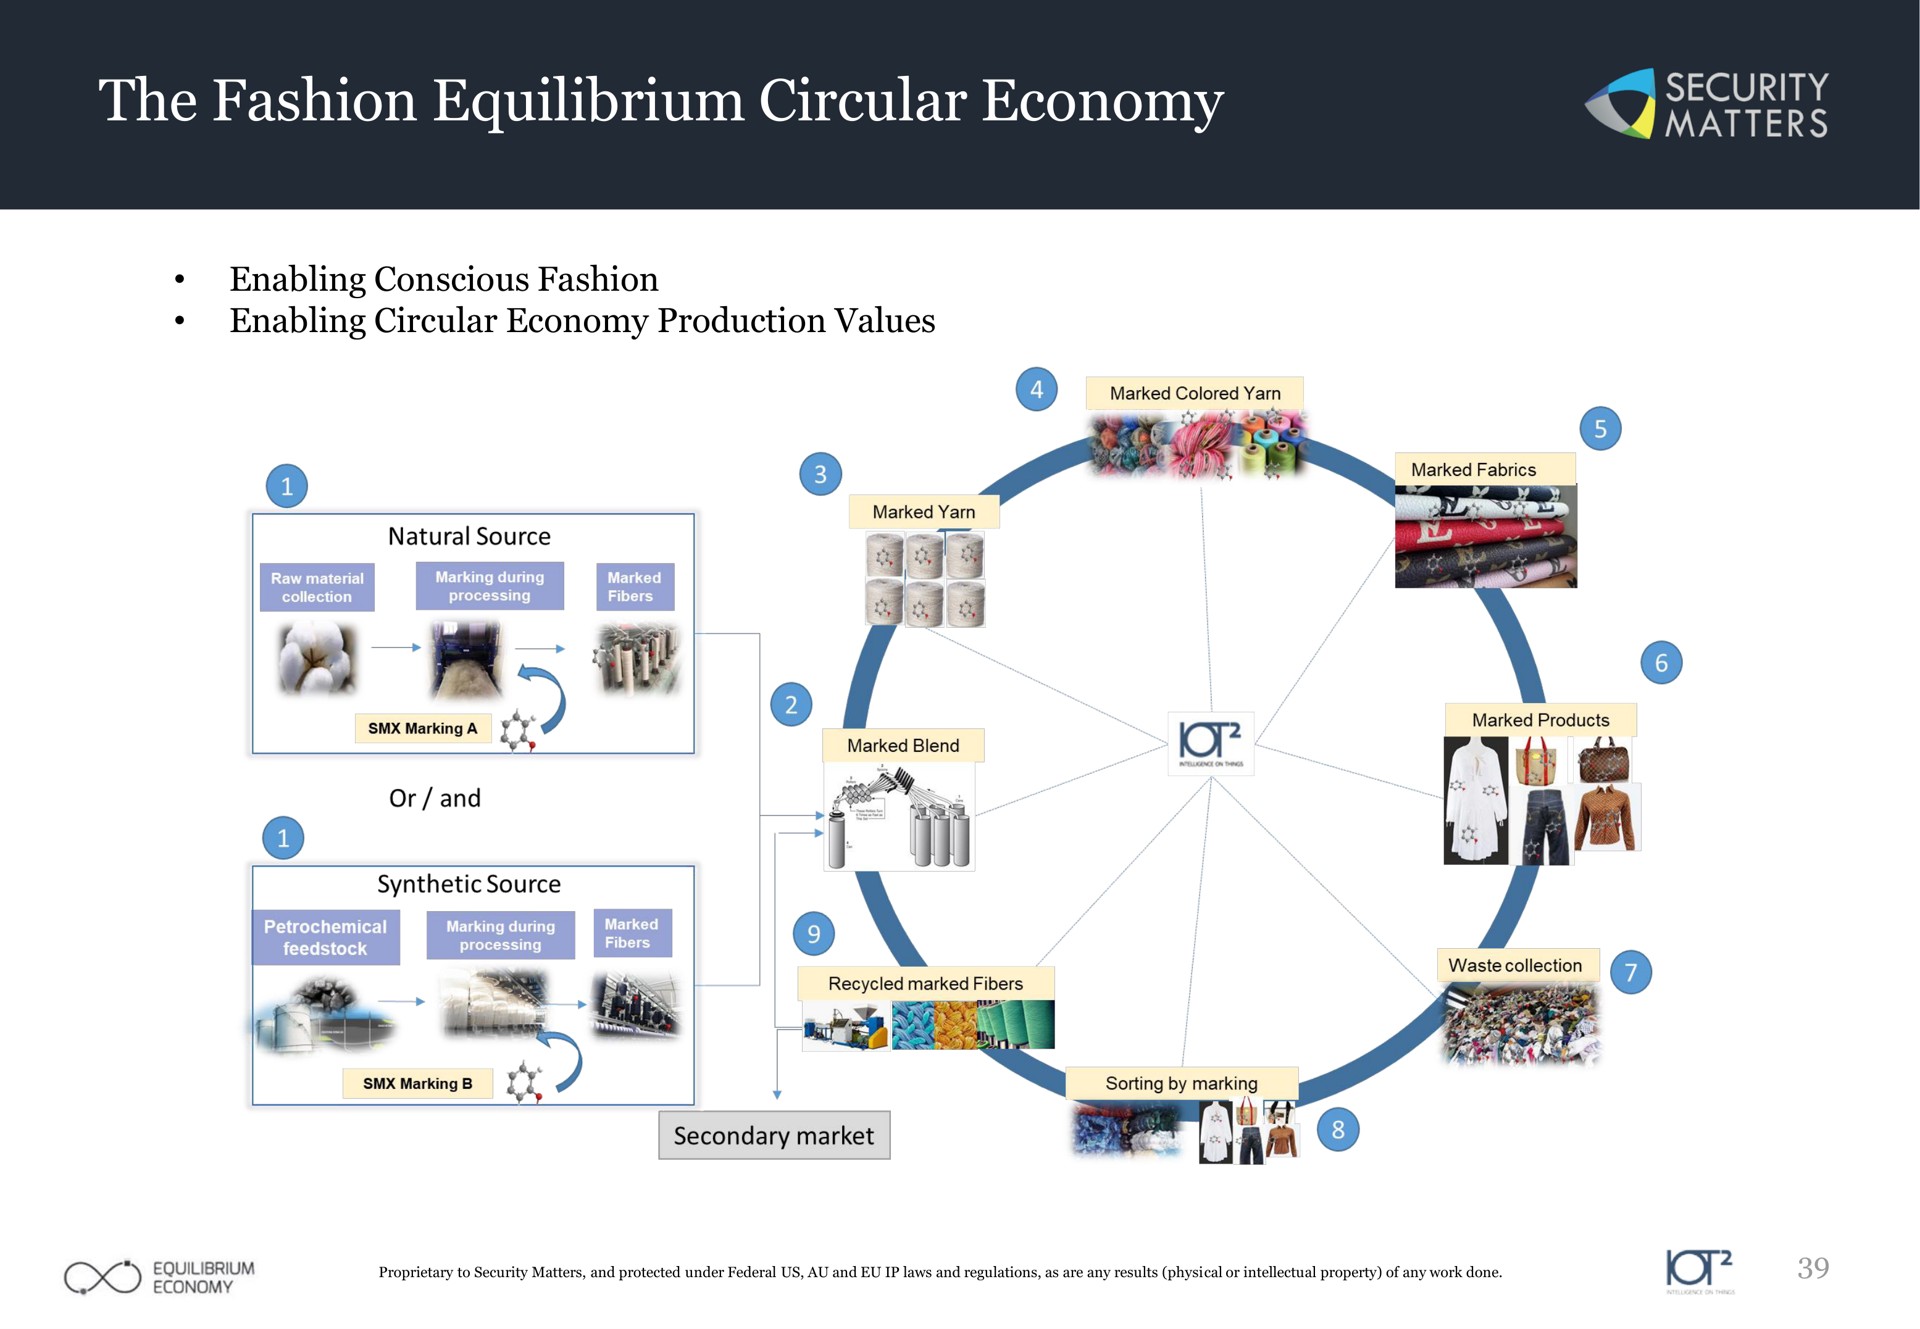 the fashion equilibrium circular economy fits a i | Security Matters